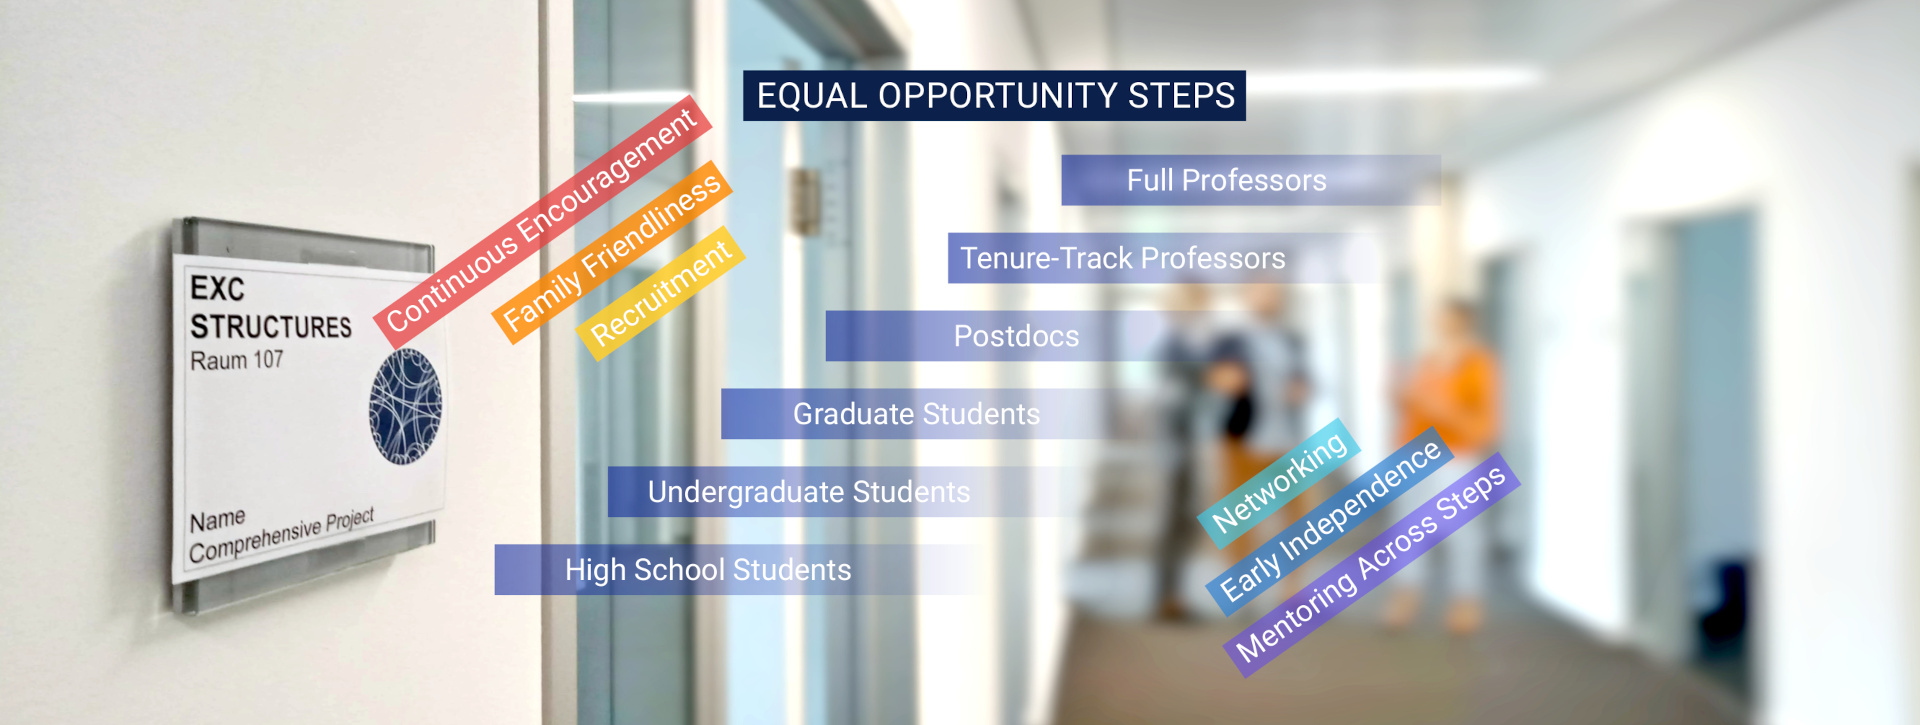 Equal Opportunity Steps graphic